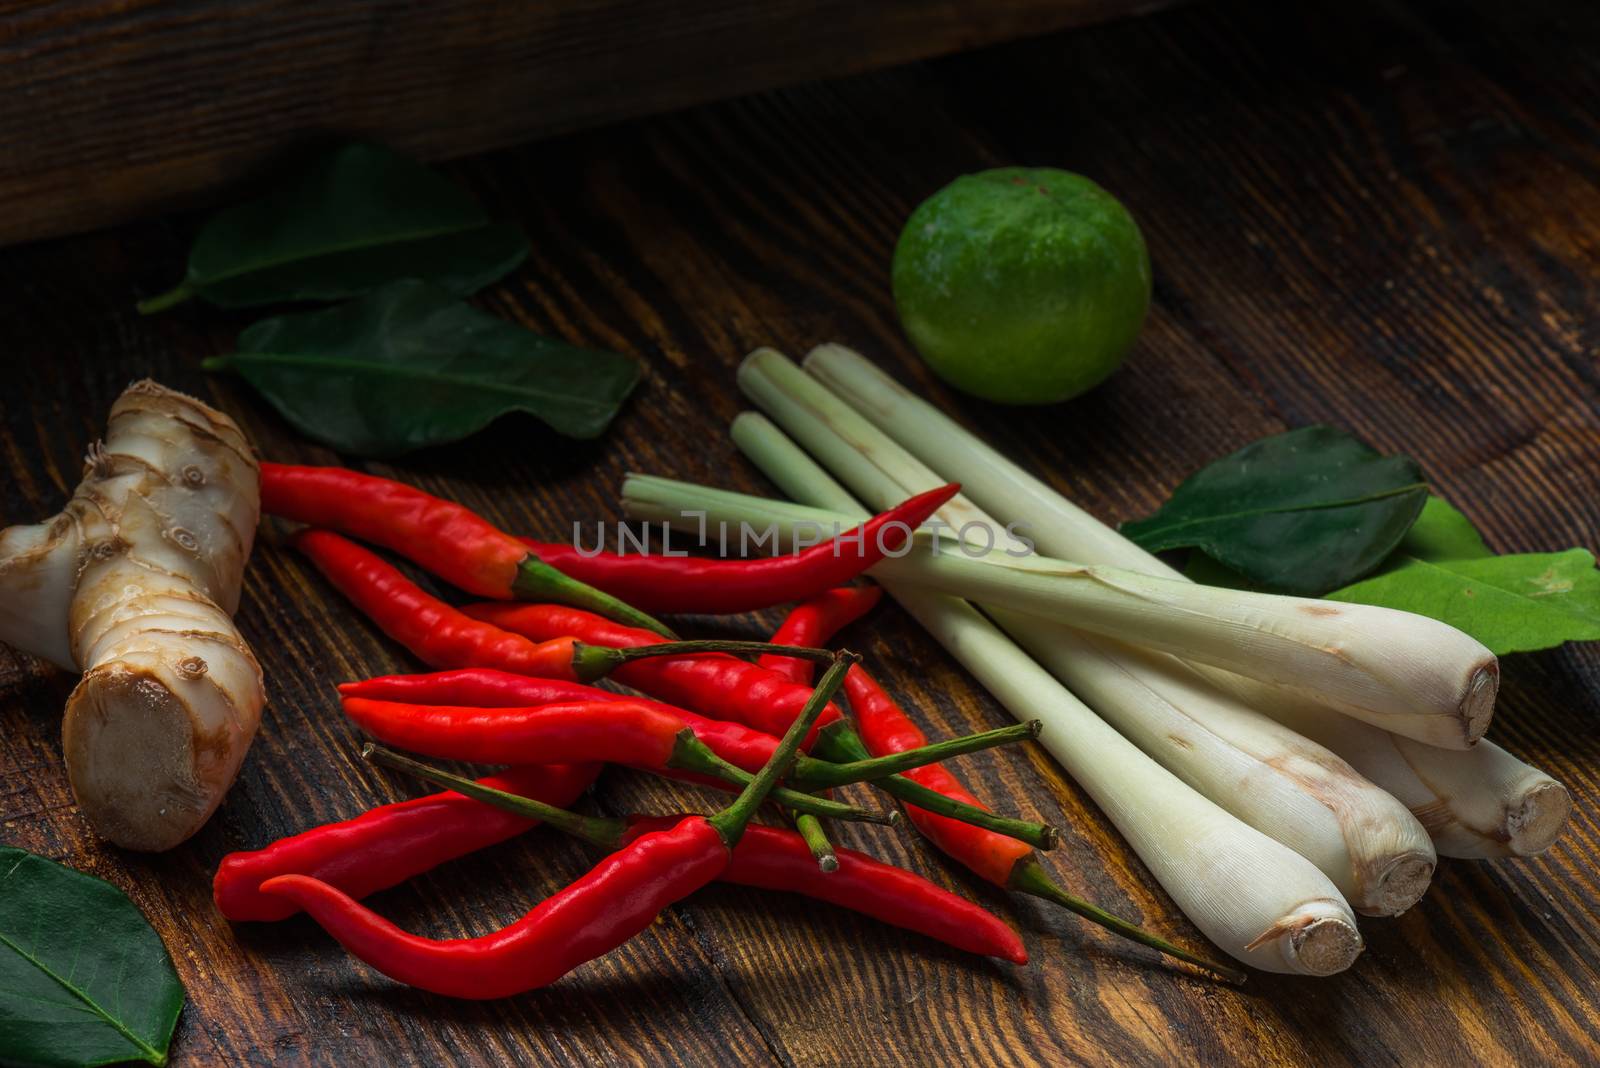 Mini chili peppers, galangal root, kaffir lime with leaves and lemongrass. Ingredients of Thai cuisine.